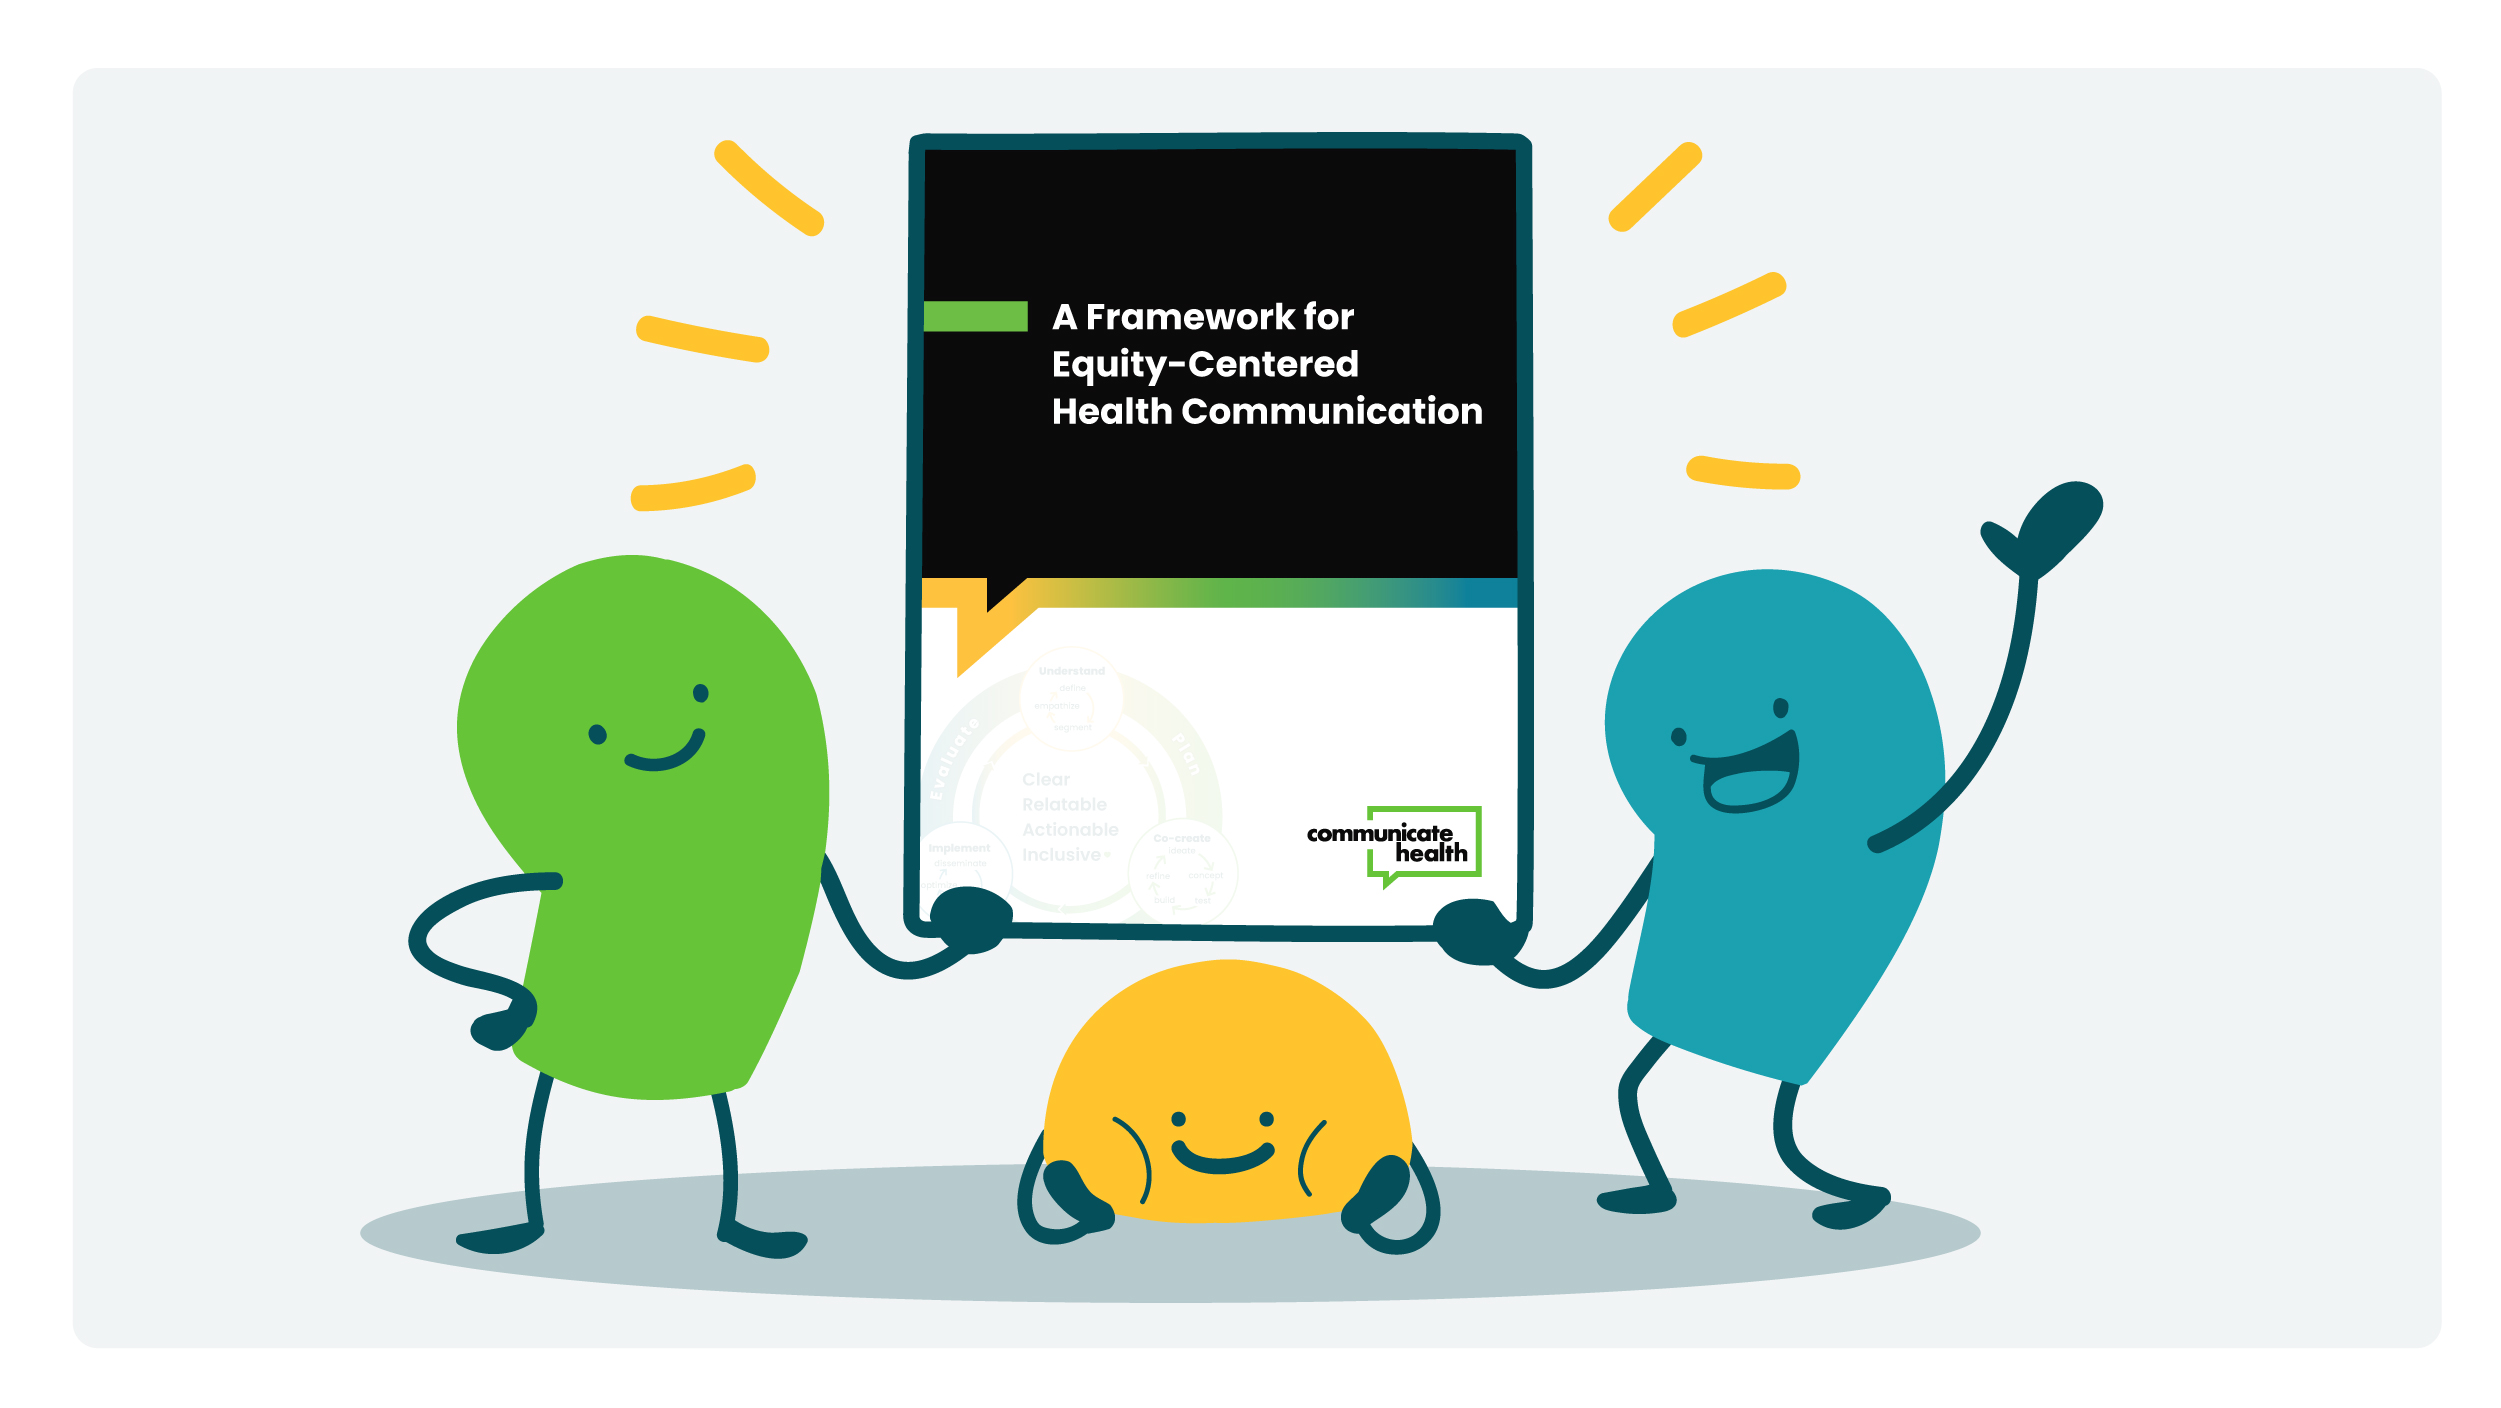 Three excited doodles presenting CommunicateHealth's new Framework for Equity-Centered Health Communication resource